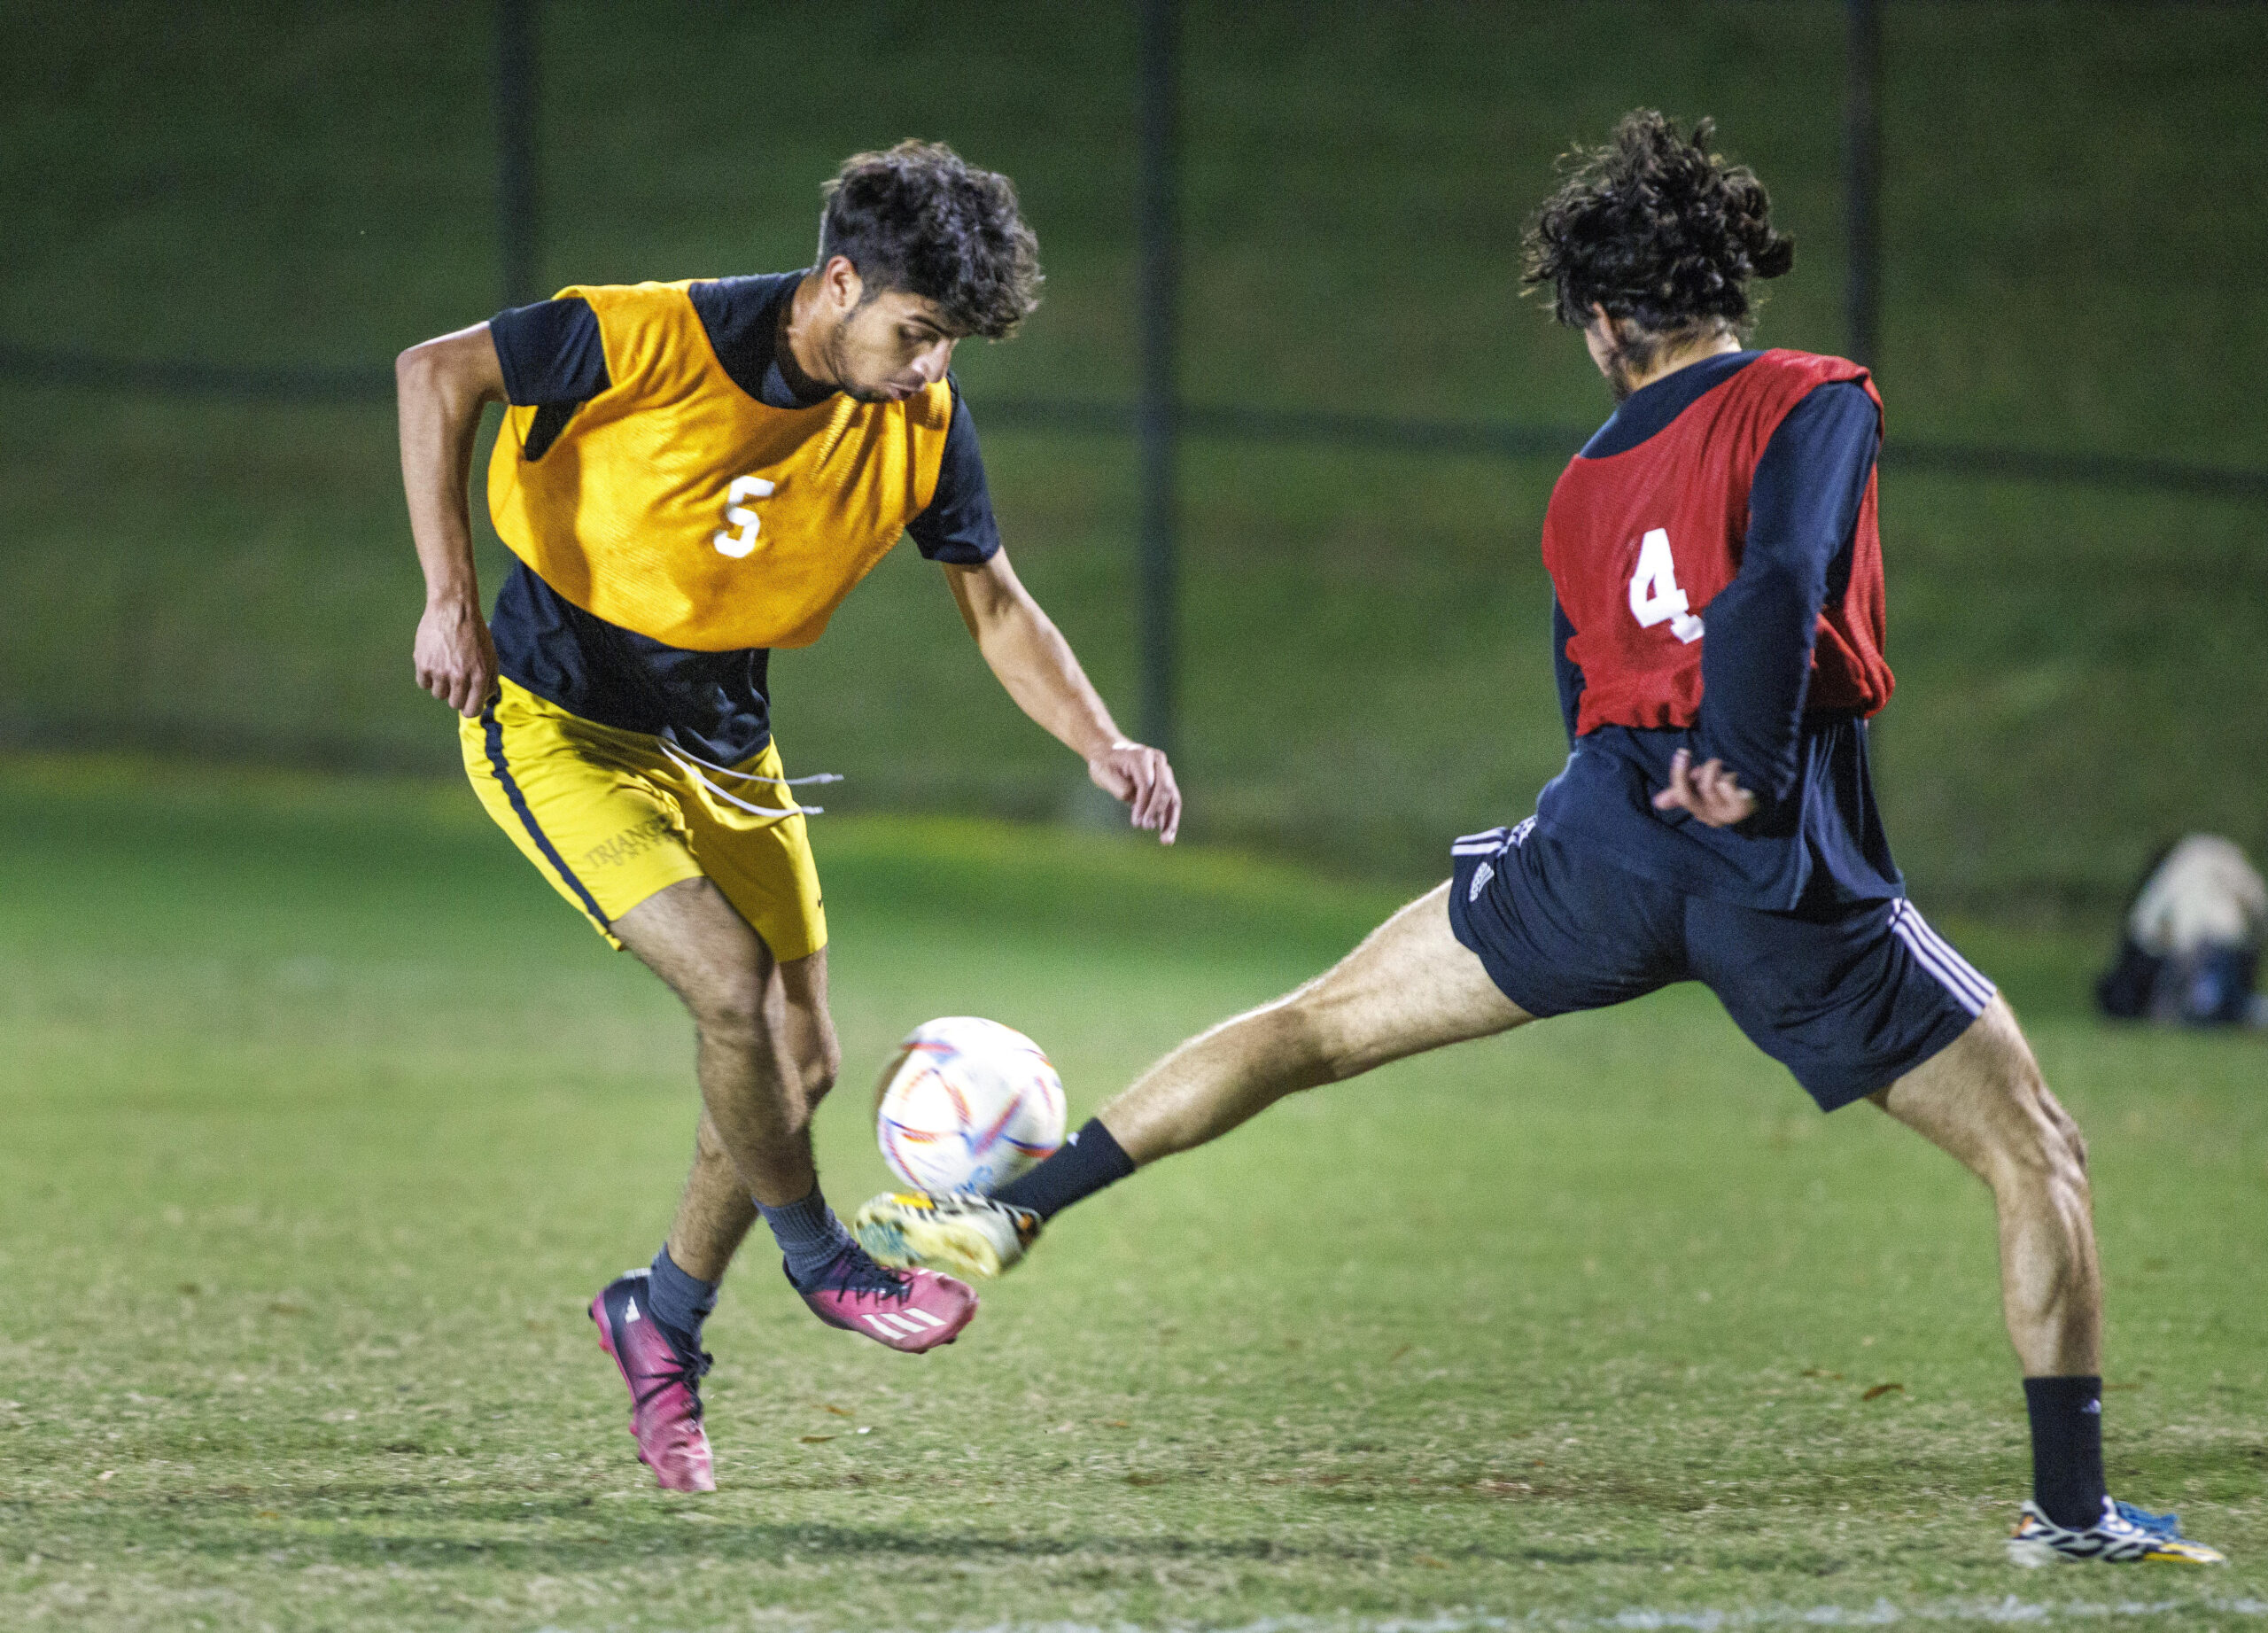 Intramural soccer players wearing red and yellow bibs fight for the ball